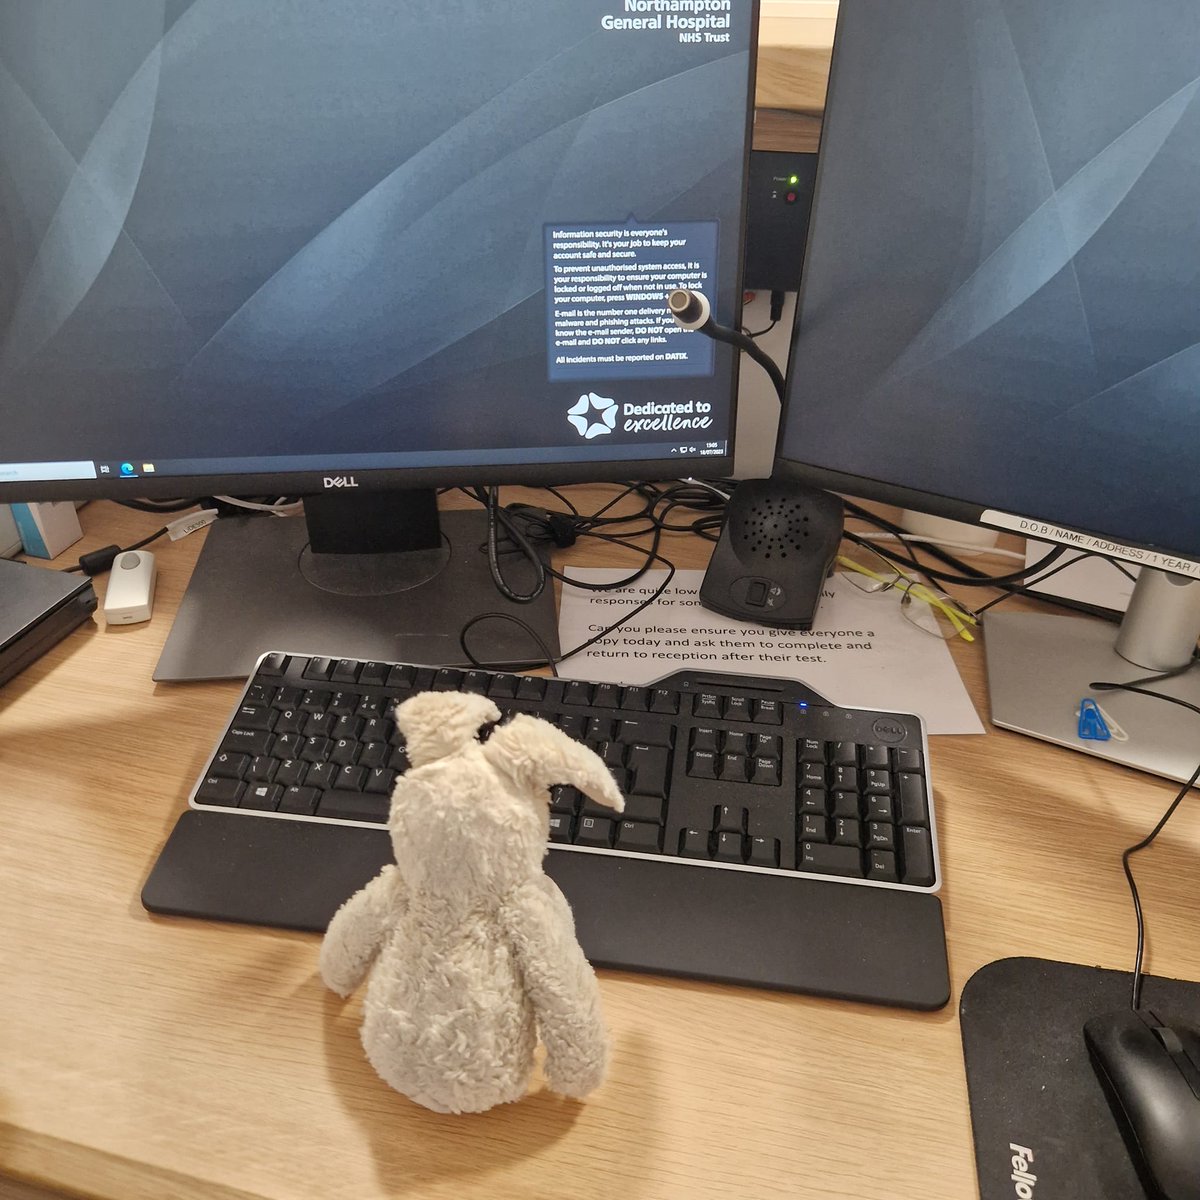 We have a lost bunny looking for it's owner! 🐰 The bunny was left behind in our Radiology department yesterday. Whilst waiting to be collected, they are helping our Radiology team to run the reception. Please help us to reunite this lost bunny with their owner💙